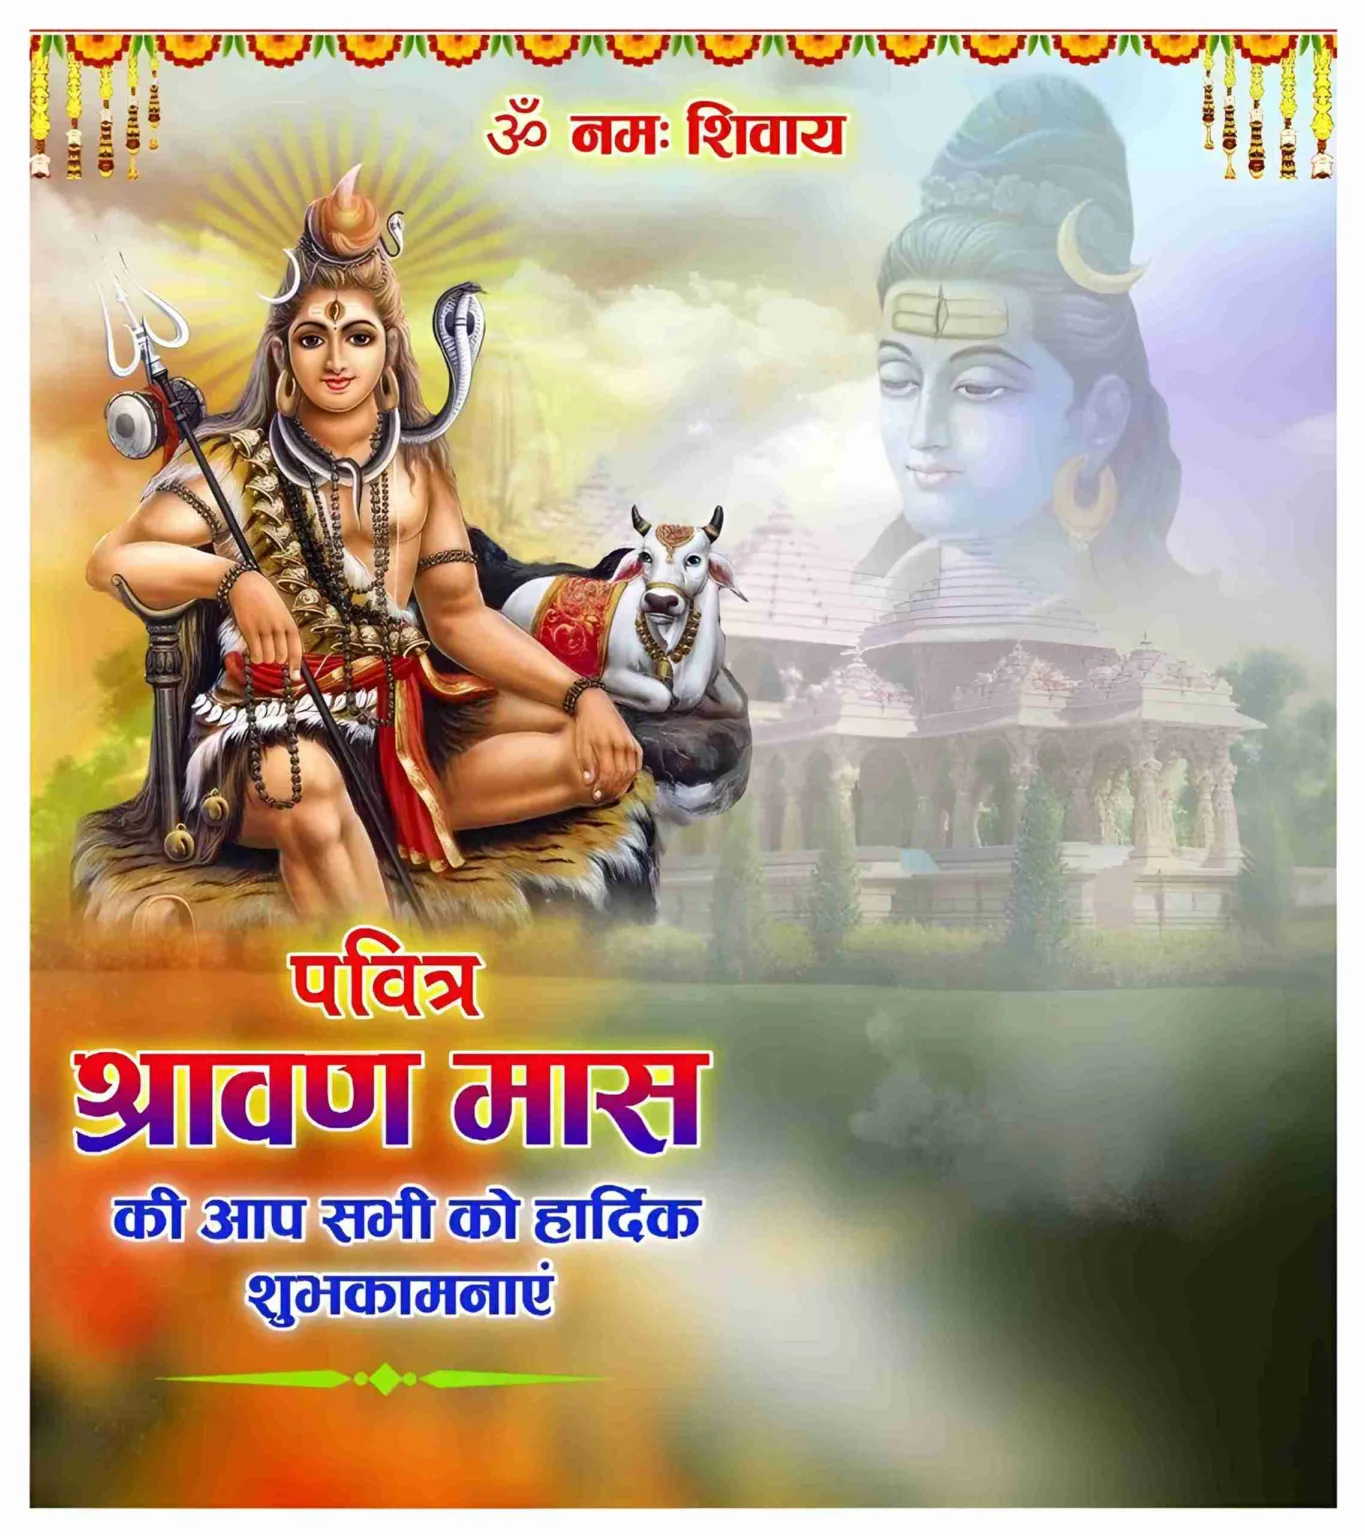 New Shivratri banner Poster Background Free Download